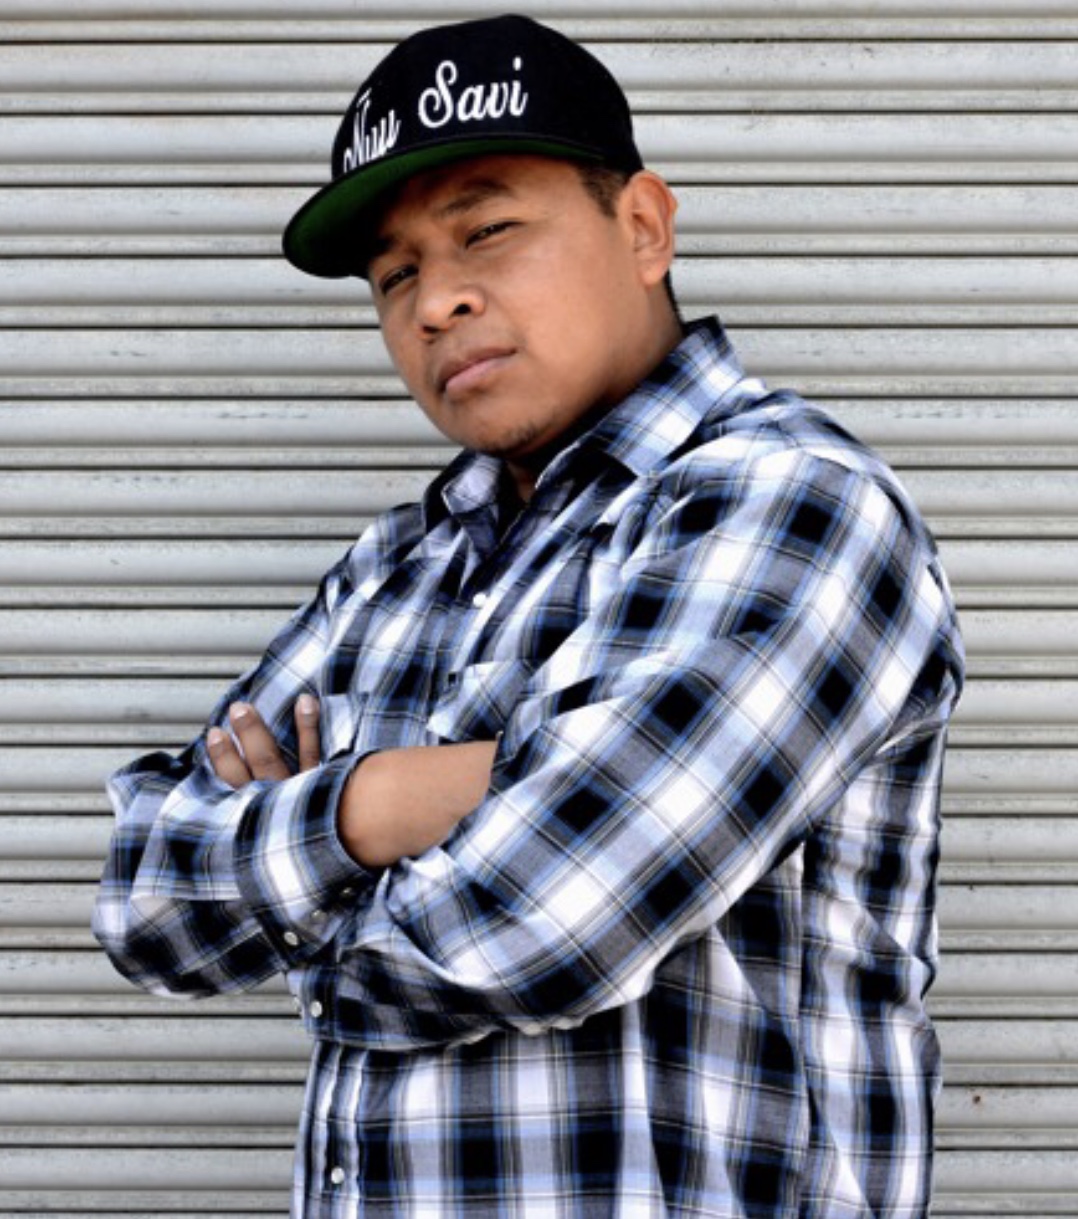 man with his arms crossed looking at the camera intently and has a snapback on